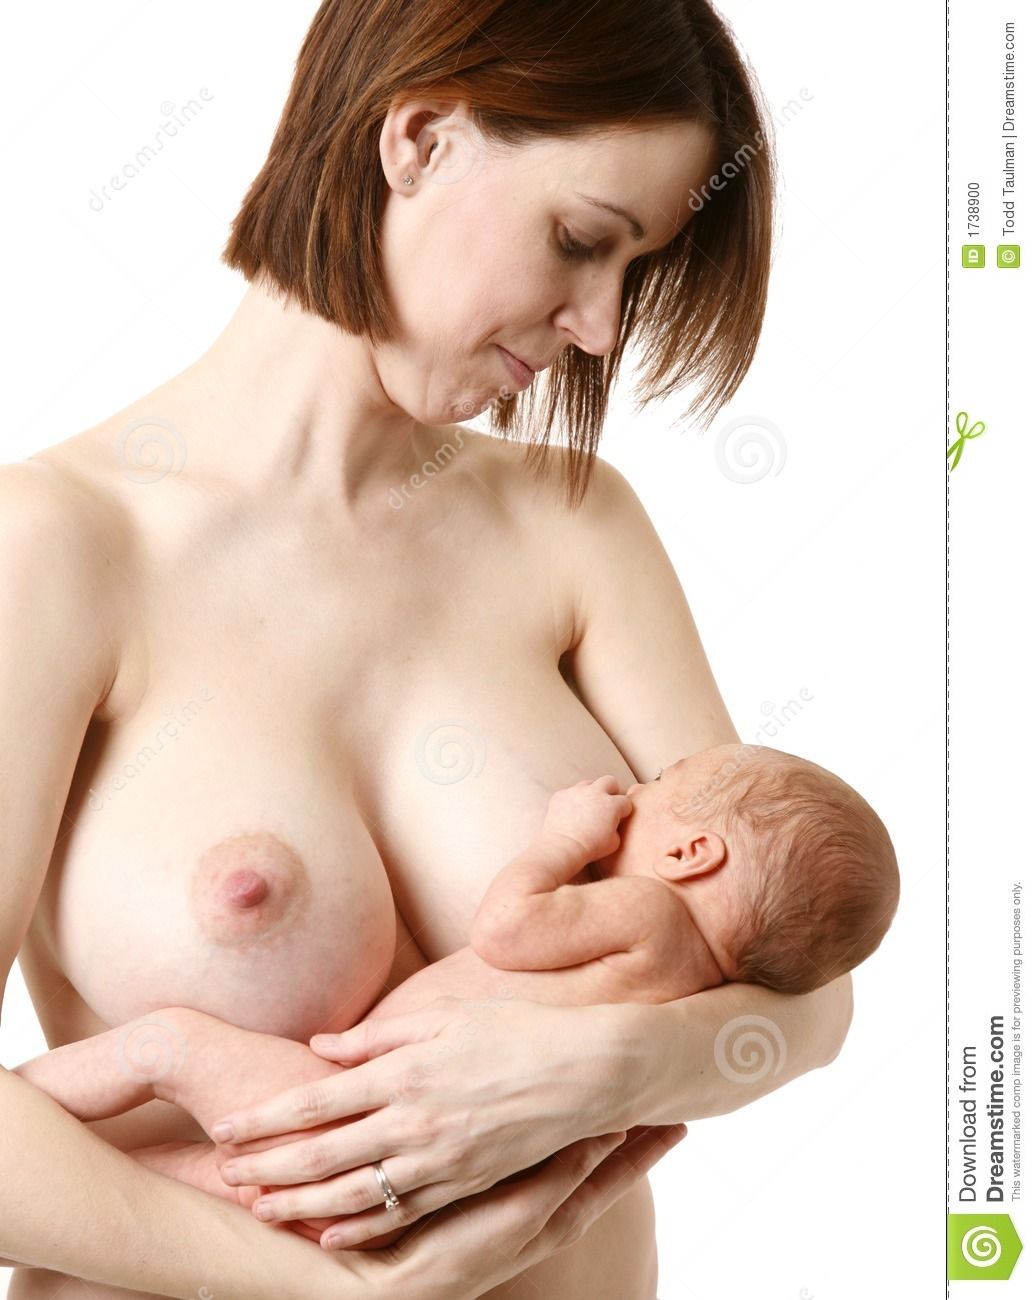 Naked pictures of a girl breast feeding Very HOT porn free pictures.